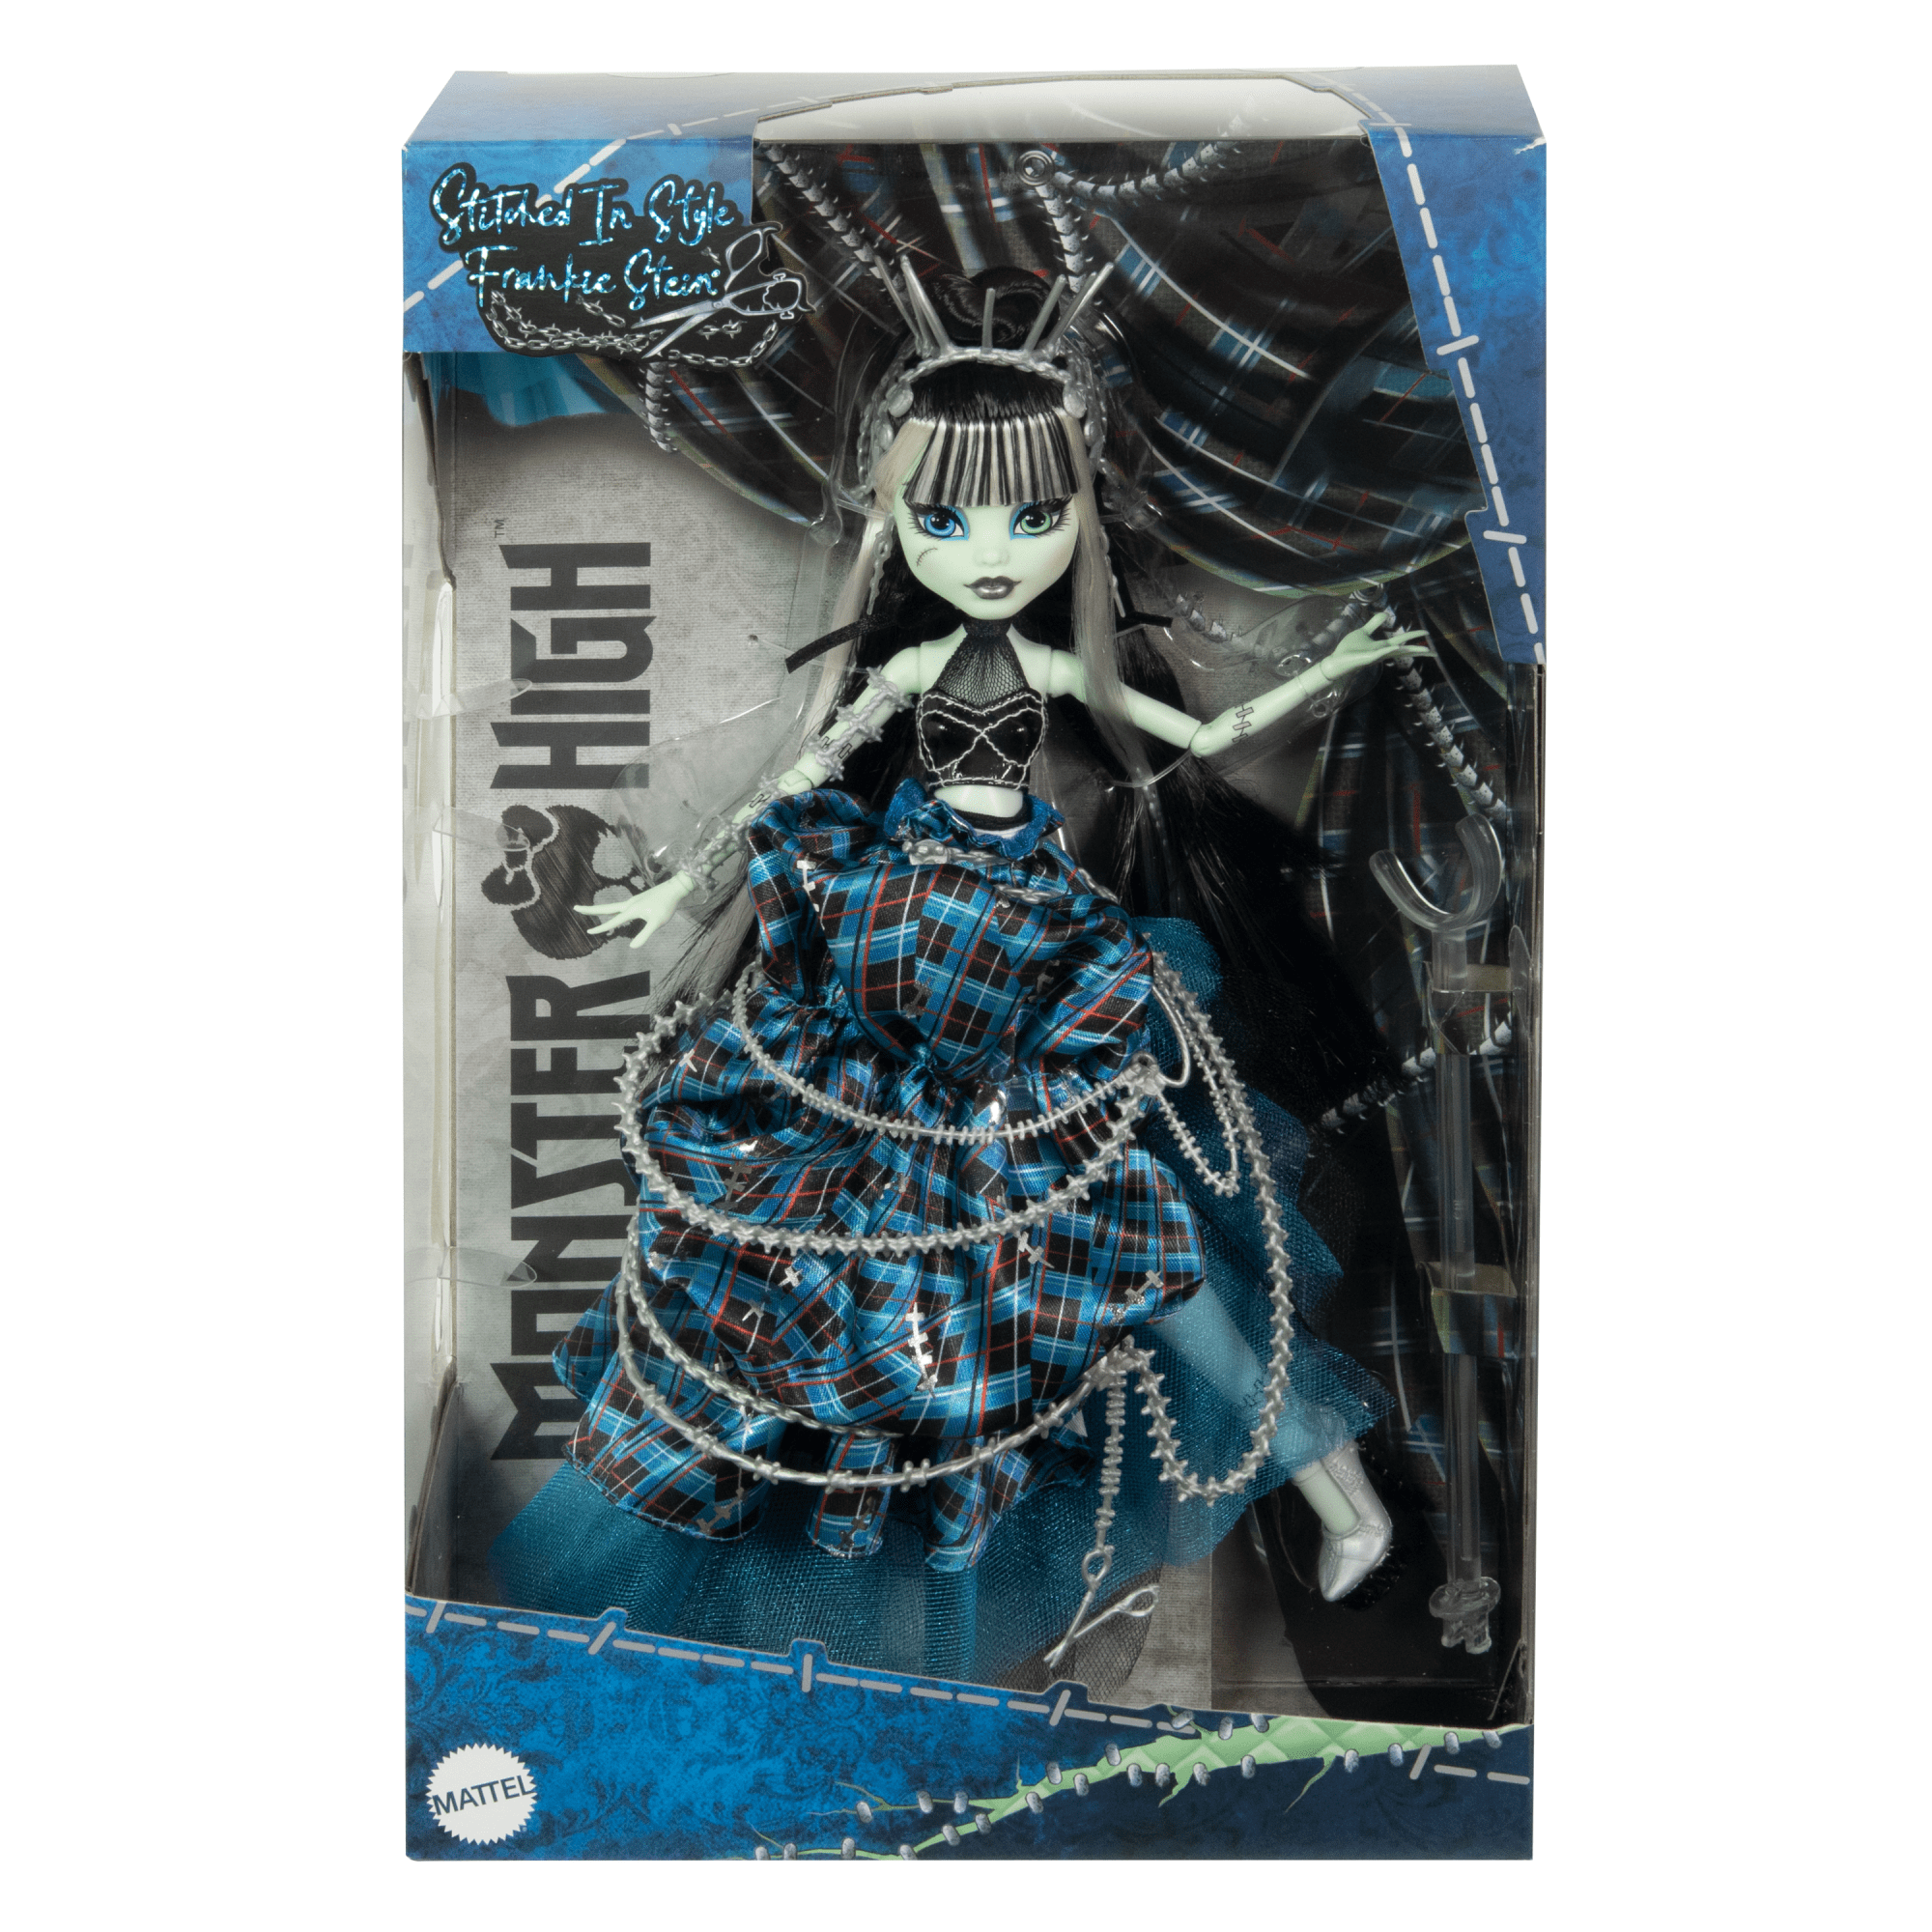 Monster High Stitched in Style Frankie Stein Doll